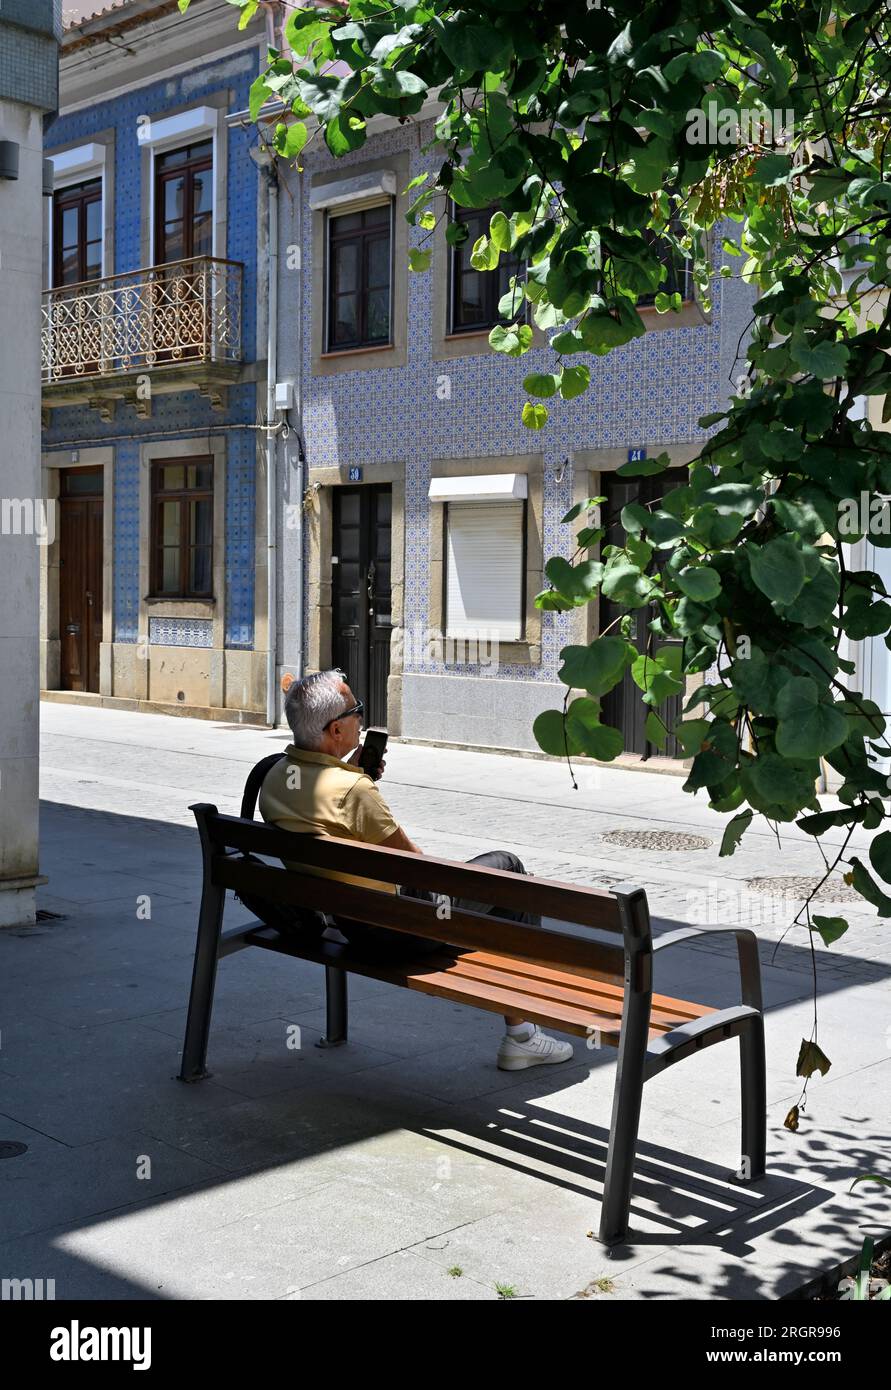 Older man sitting on bench relaxing in shade with traditional tilled building in background, Portugal Stock Photo